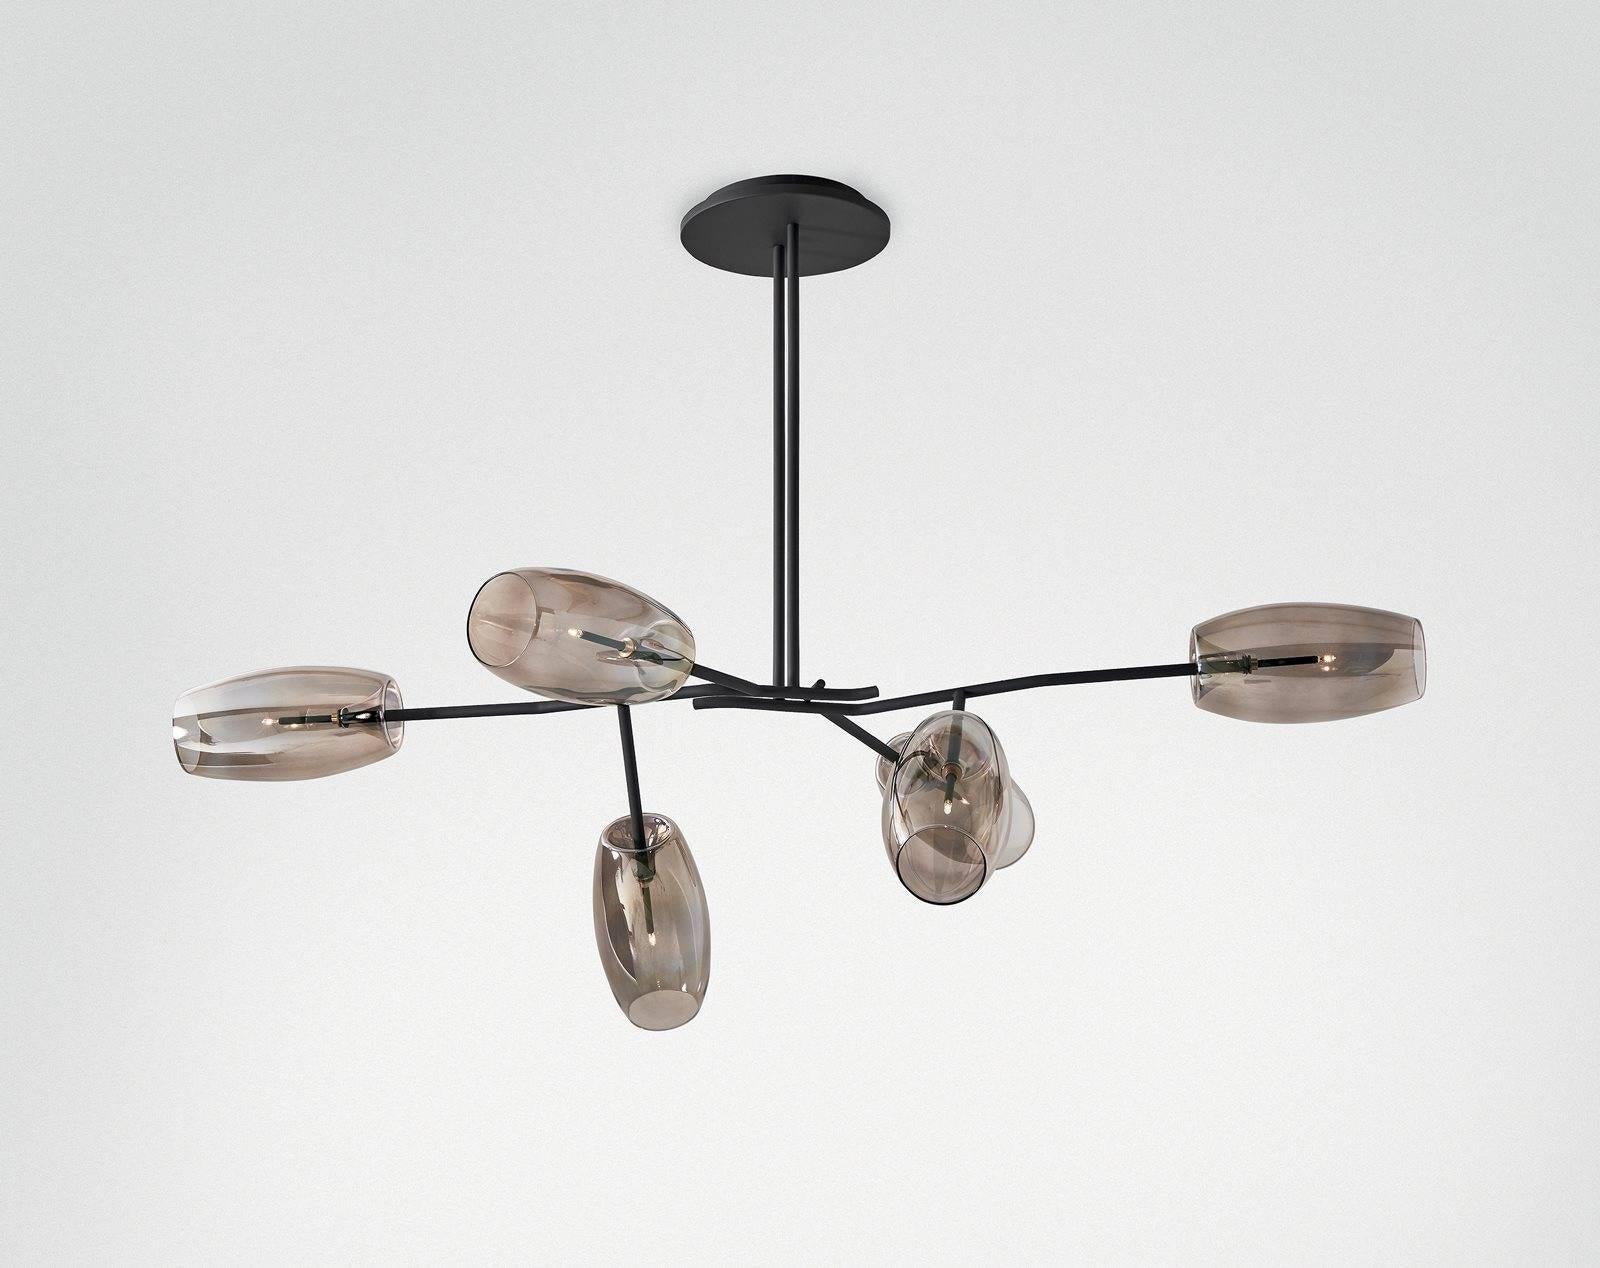 Diantha Chandelier DH, Gallotti & Radice with Mouth Blown Glass & Bronzed Metal For Sale 1